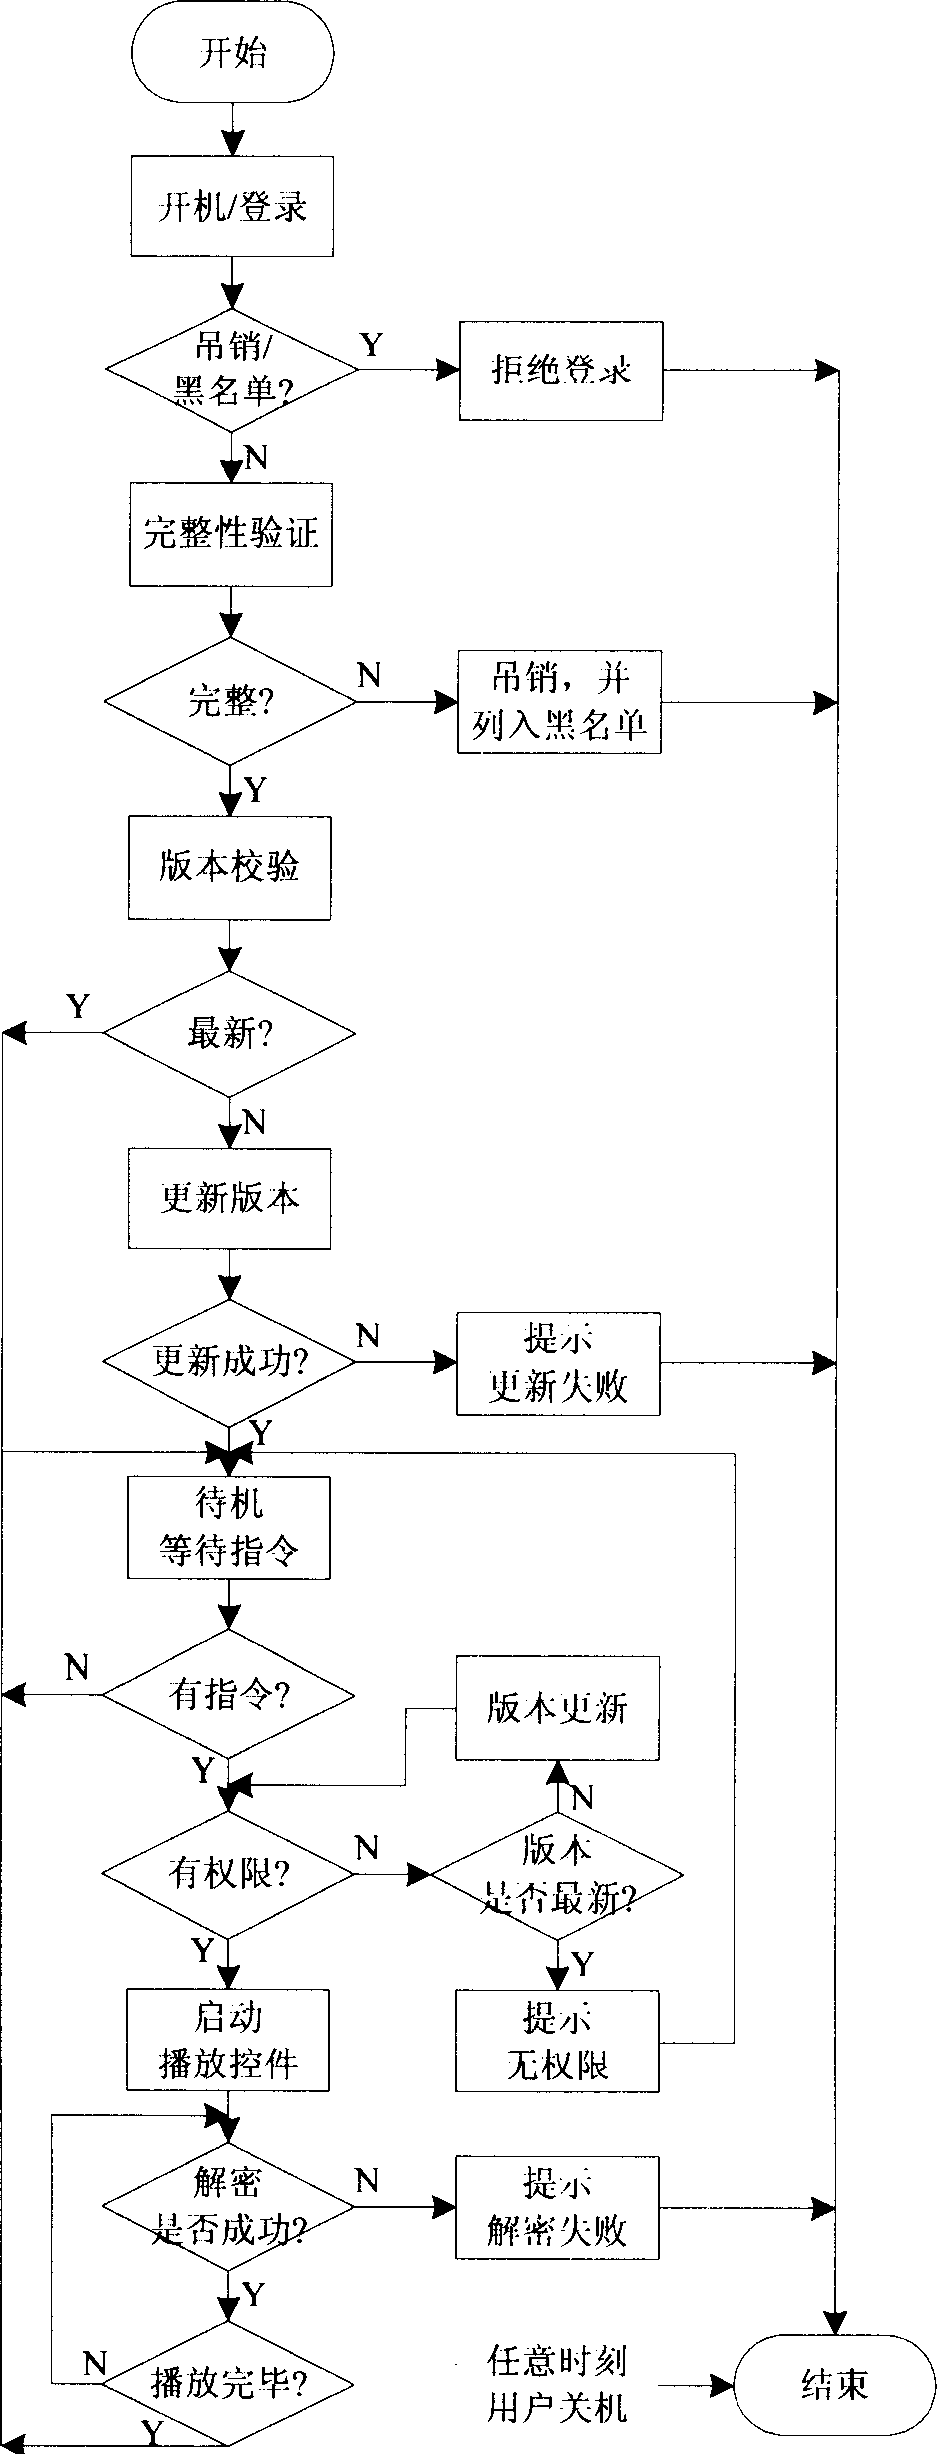 Method of controlling security of terminal set top box applied under environment of living broadcast and broadcast on demand